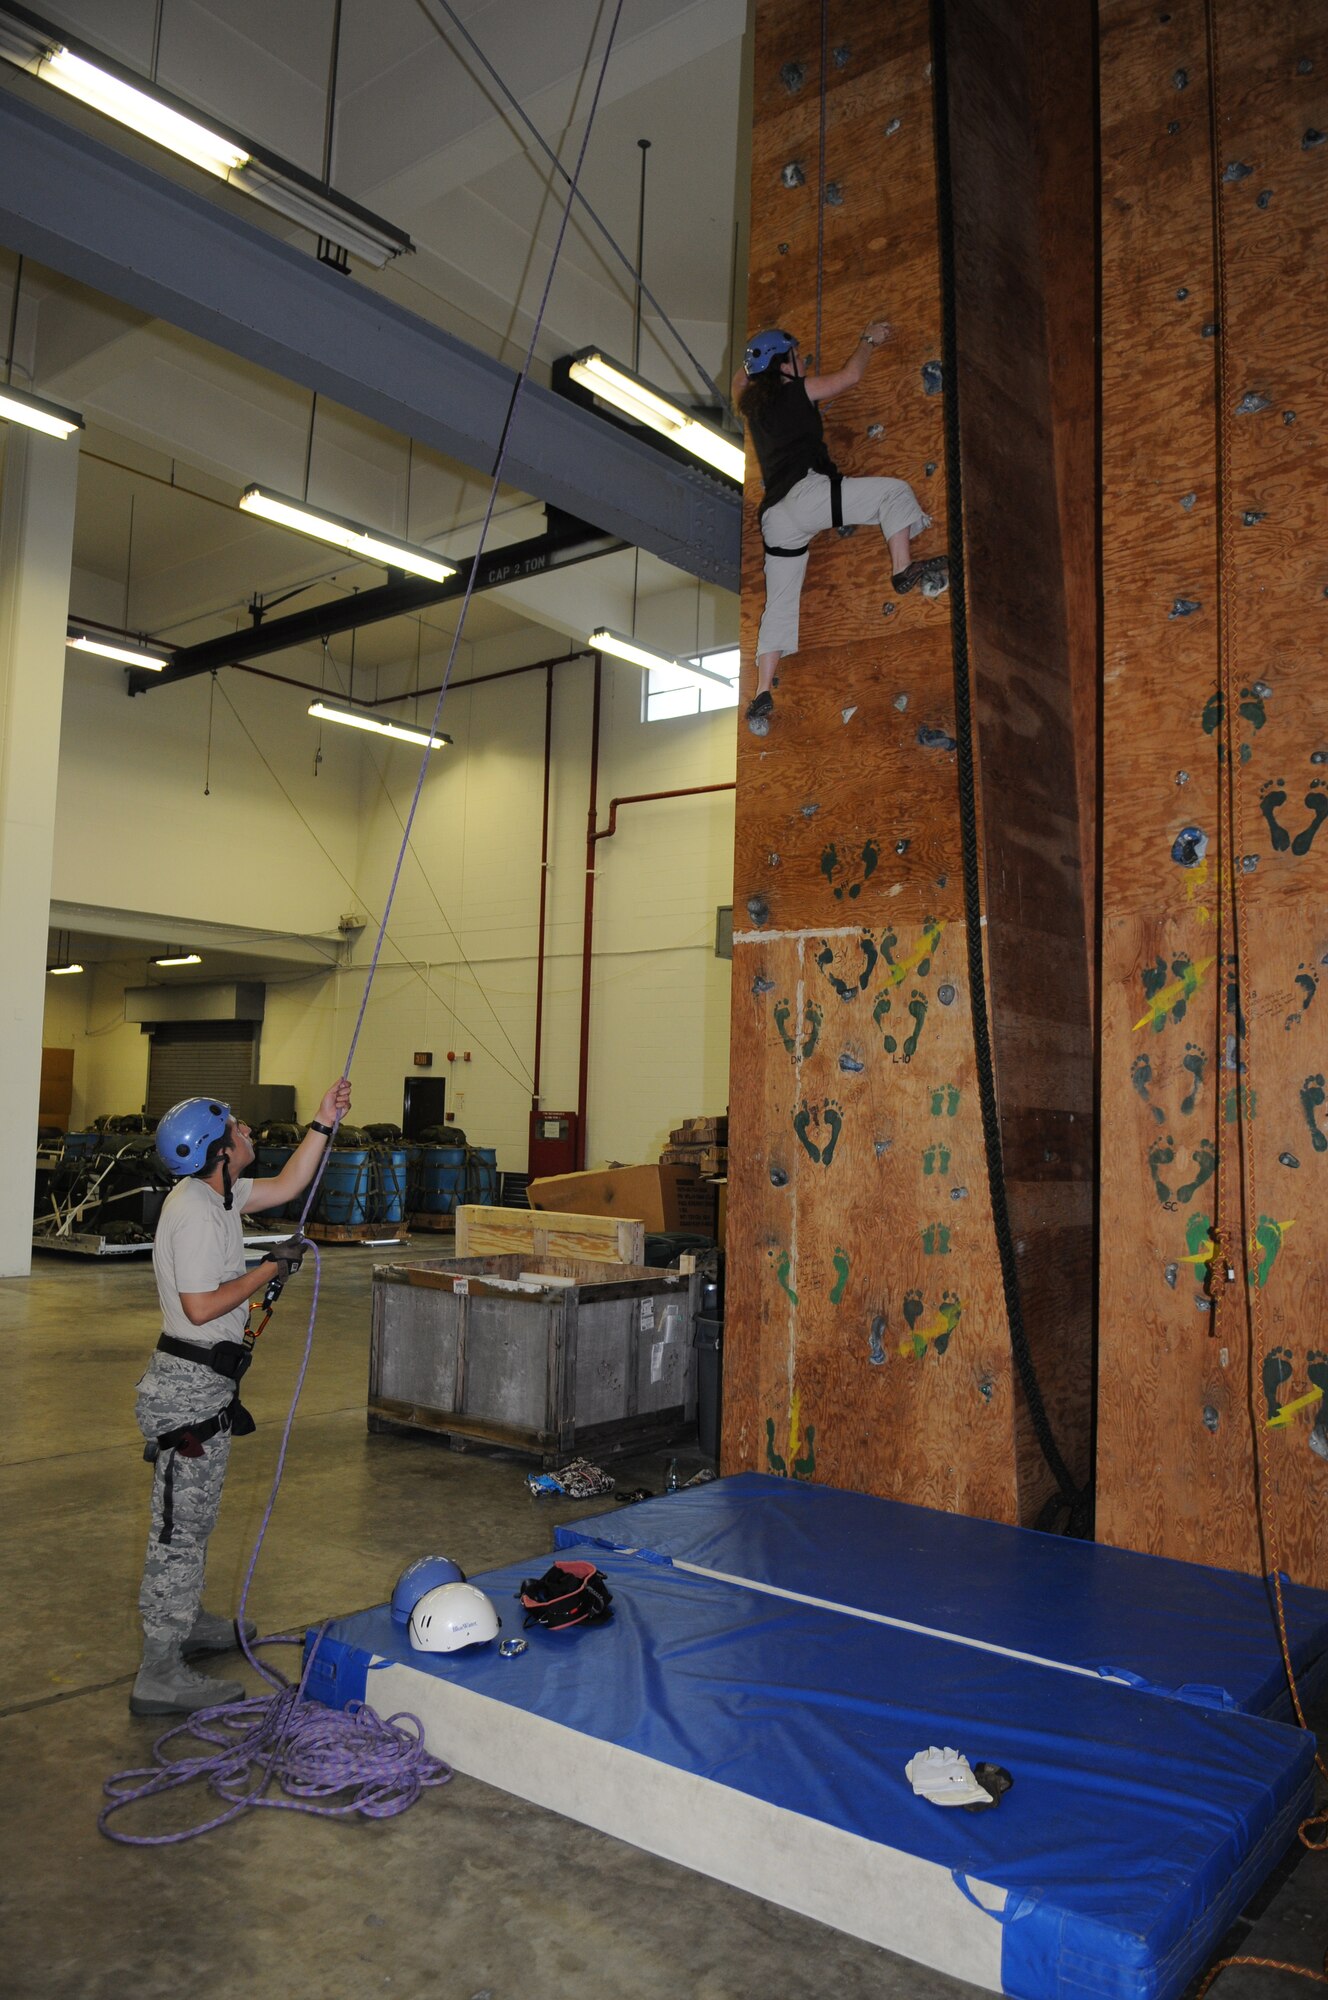 KADENA AIR BASE, Japan -- Eileen O'Reilly climbs a rock-climbing training wall as Staff Sgt. Kevin Freyre, a 320th Special Tactics Squadron pararescueman, supports her here May 7 during a spouse orientation day. Spouses from the 353rd Special Operations Group were treated to a small capabilities brief, a tour of the 320th Special Tactics Squadron and their equipment and orientation flights on a MC-130P Combat Shadow and MC-130H Combat Talon II during the event. (U.S. Air Force photo by Tech. Sgt. Aaron Cram)